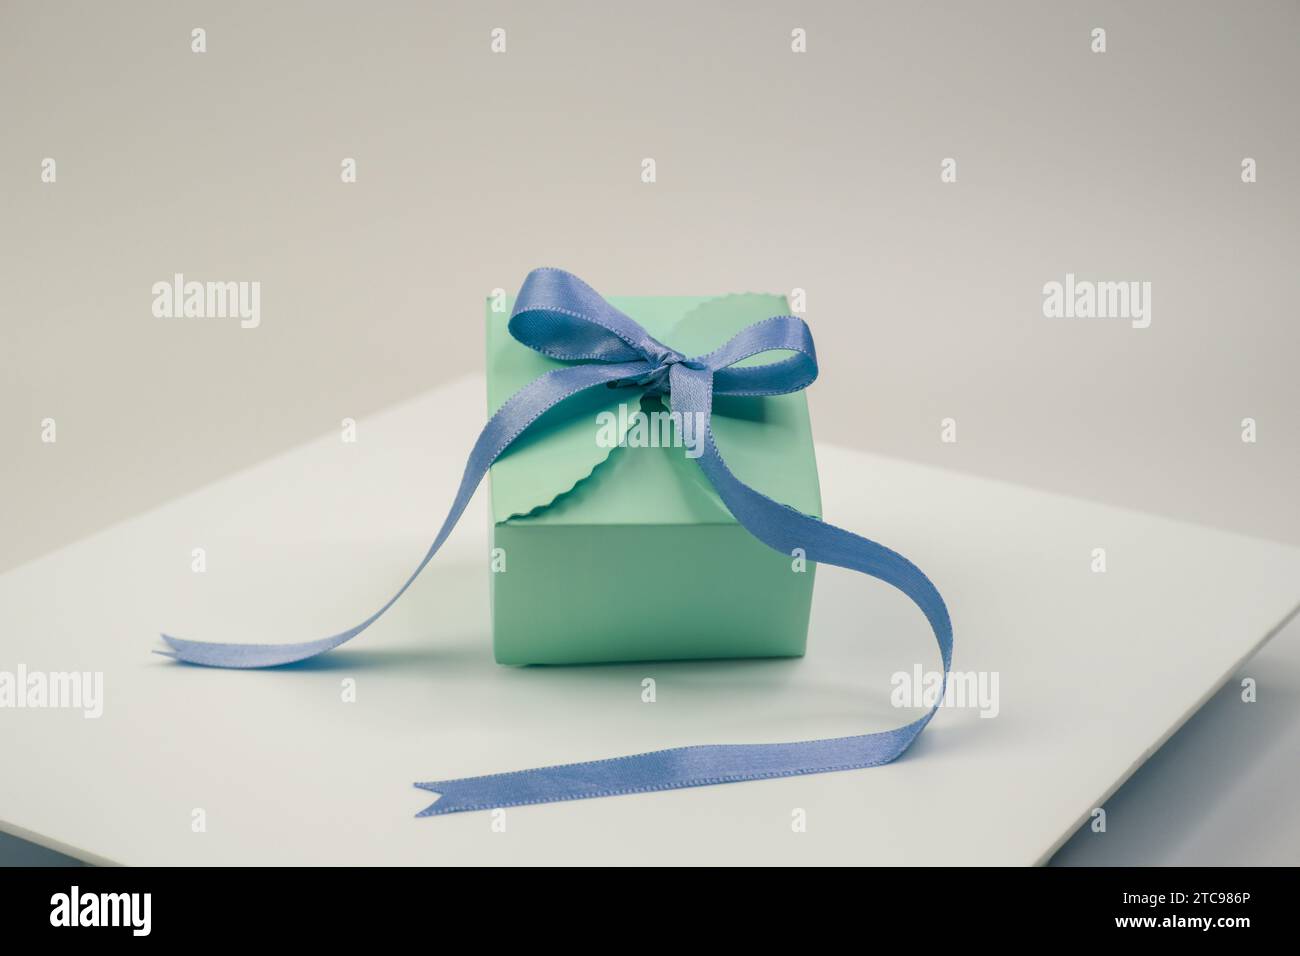 An isolated image of a colorful present, wrapped in blue and green paper, sitting on a white plate Stock Photo